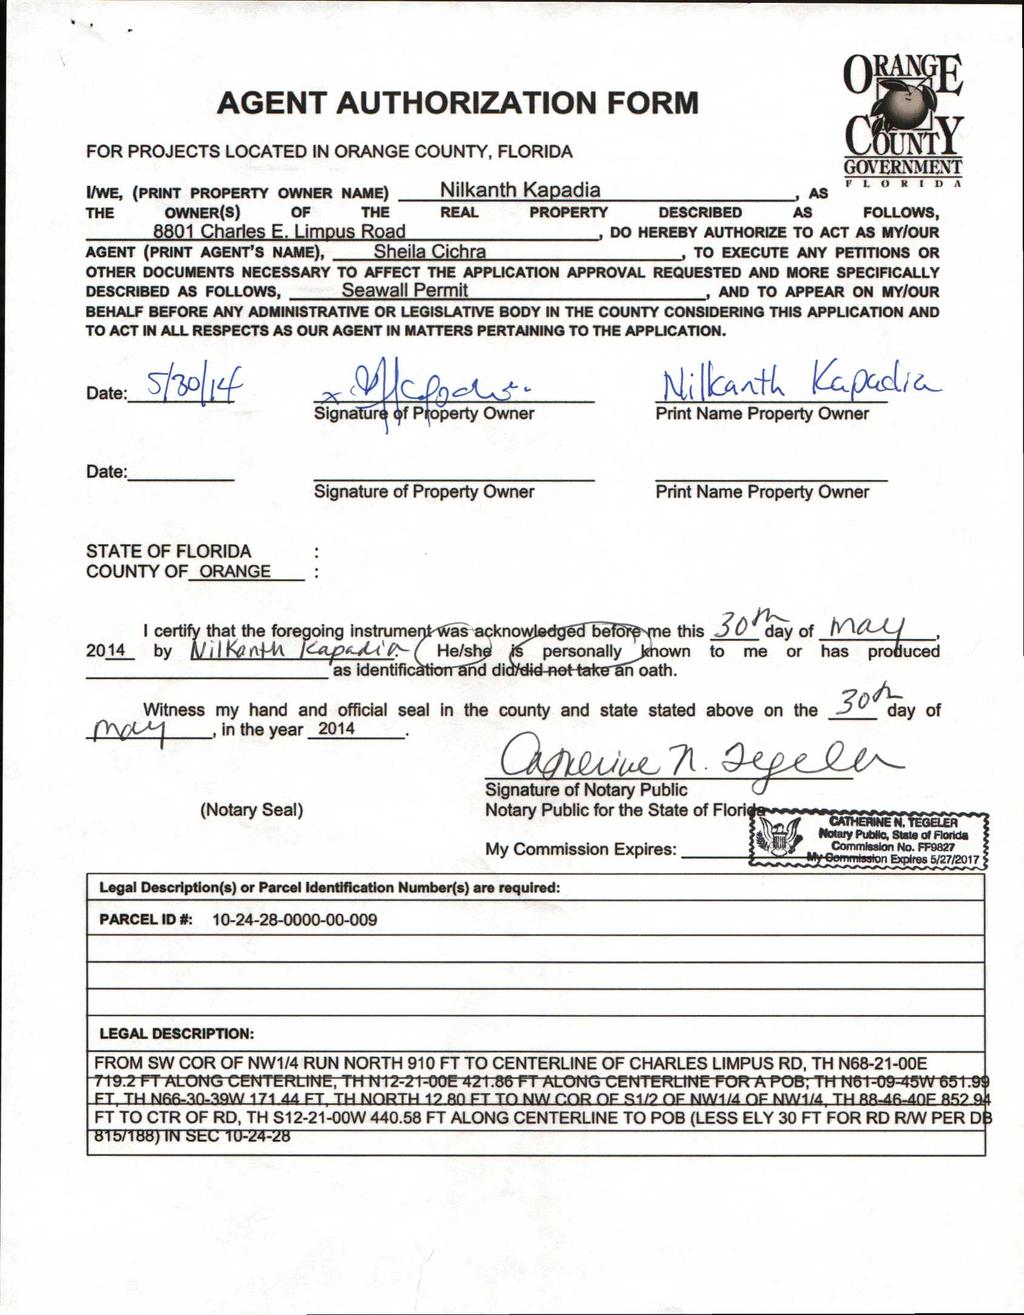 AGENT AUTHORIZATION FORM FOR PROJECTS LOCATED IN ORANGE COUNTY, FLORIDA ORAN C uniy GOVERNMENT I, 1.